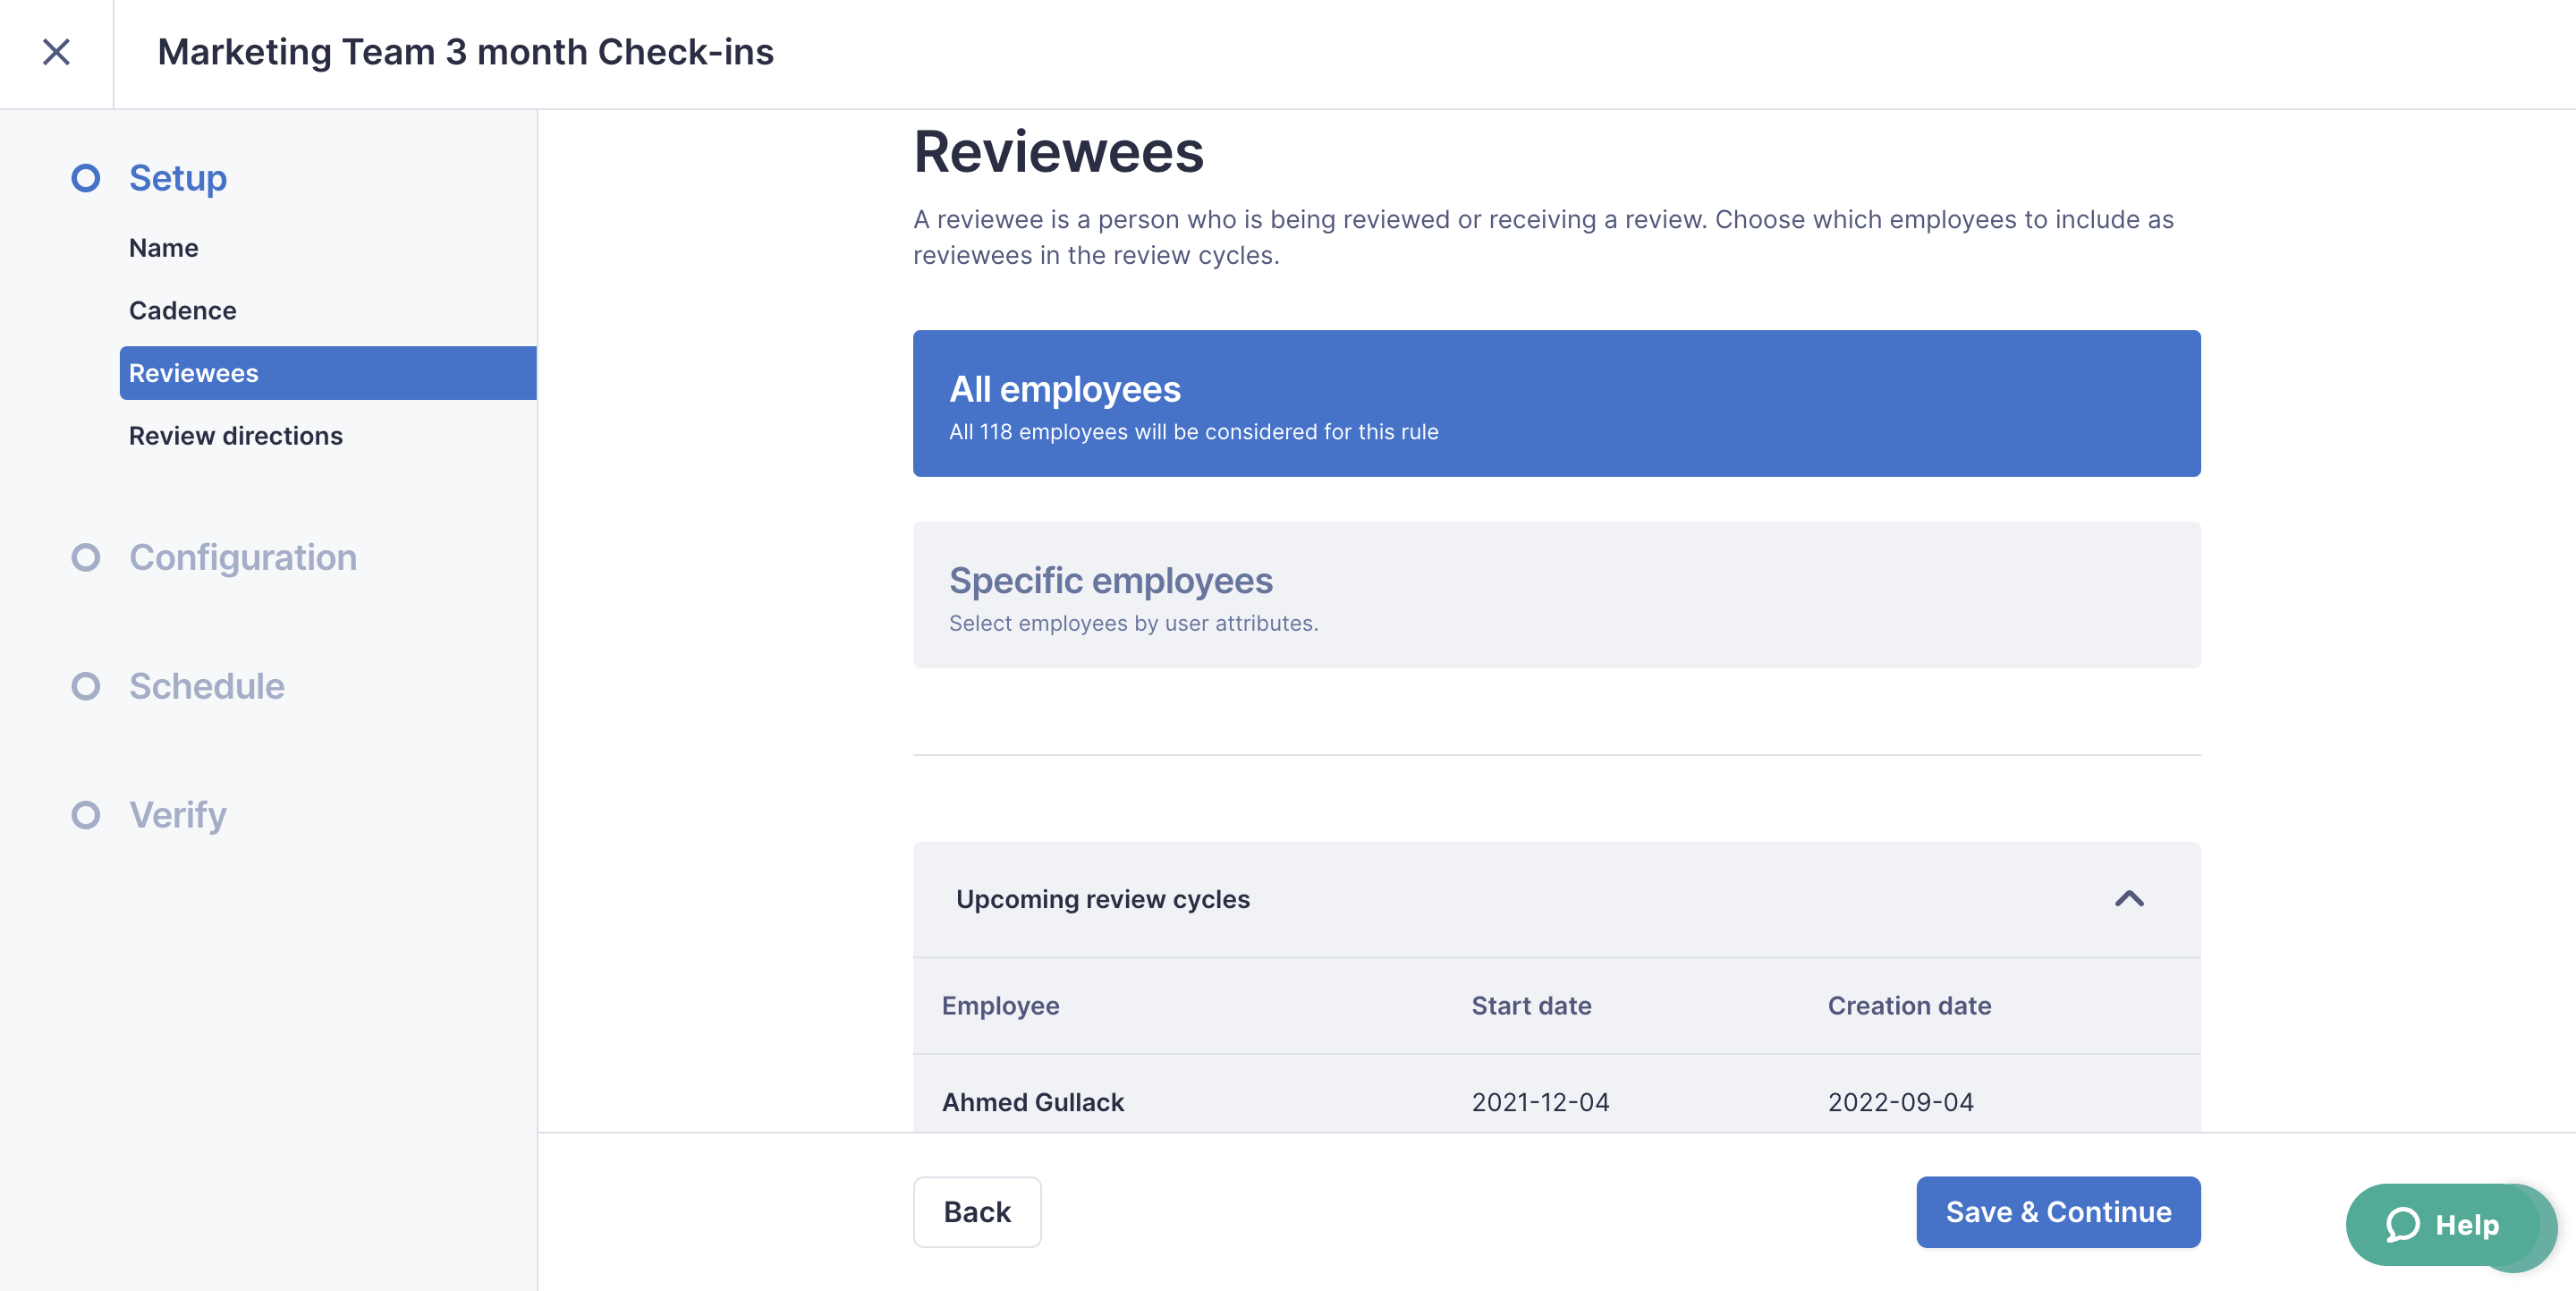 Image of the Automated Rules settings within the Revieweews page